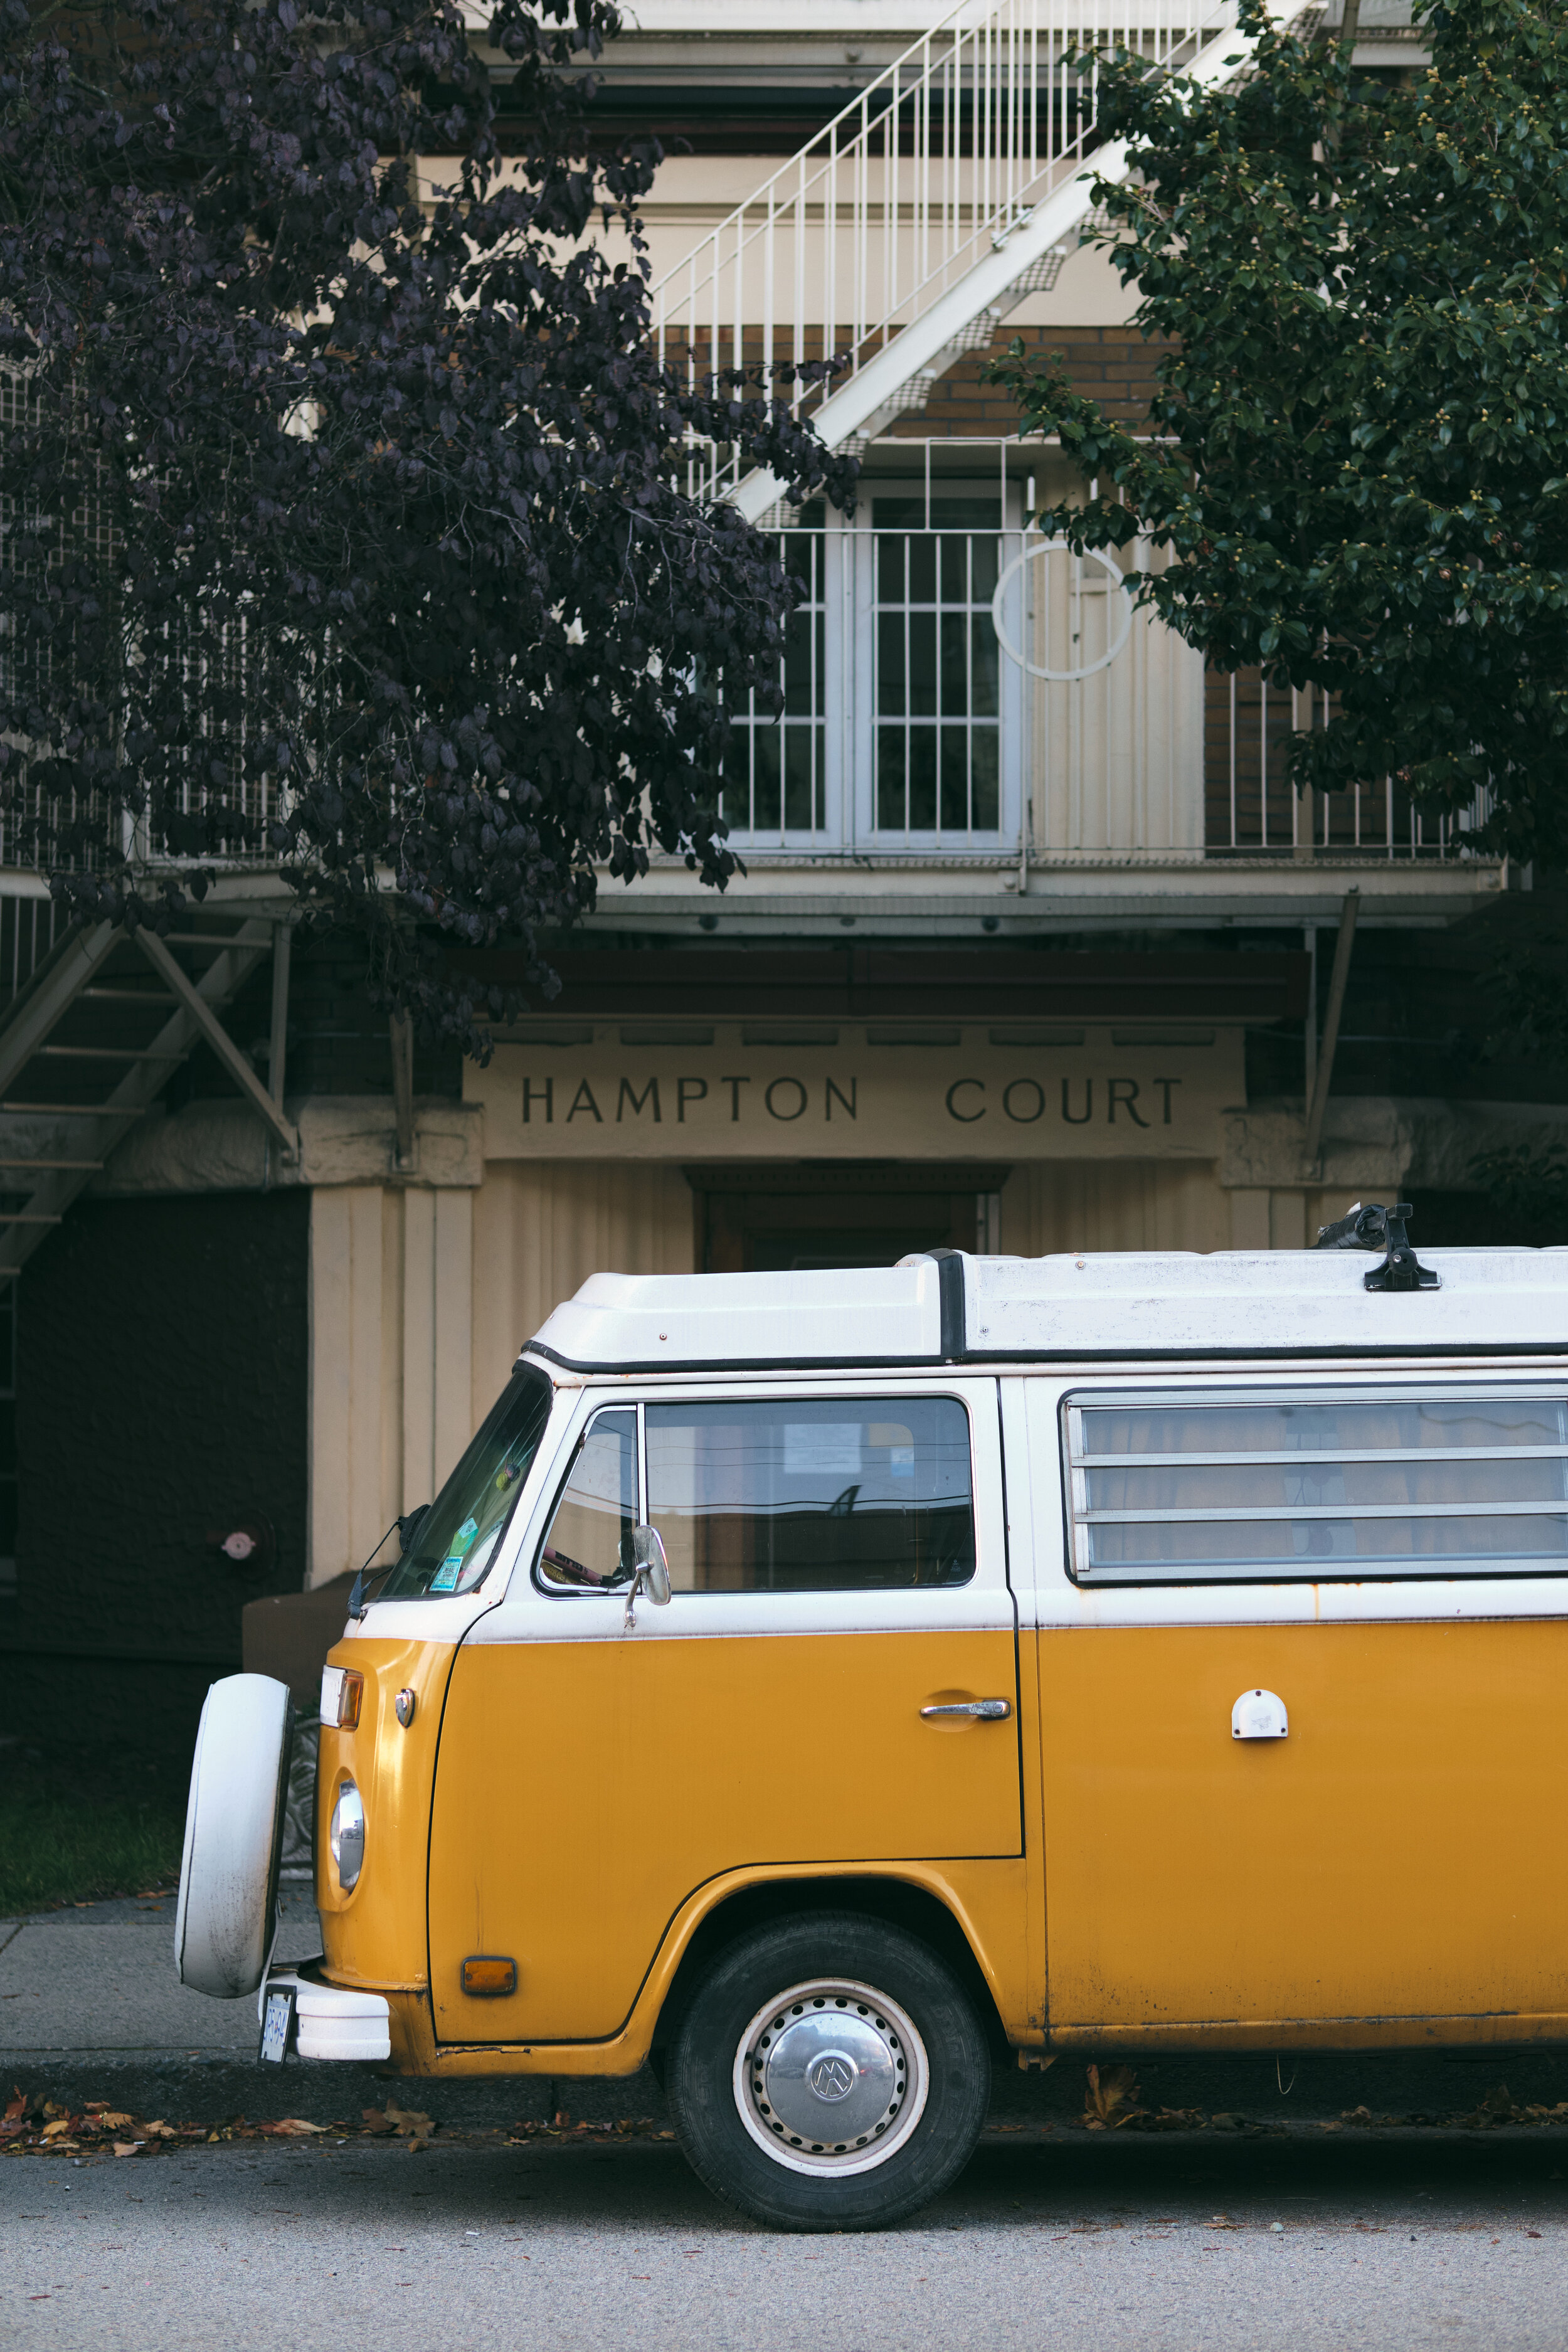 A VW bus. Sample image from a Fujifilm XF 50mm f/1 R WR